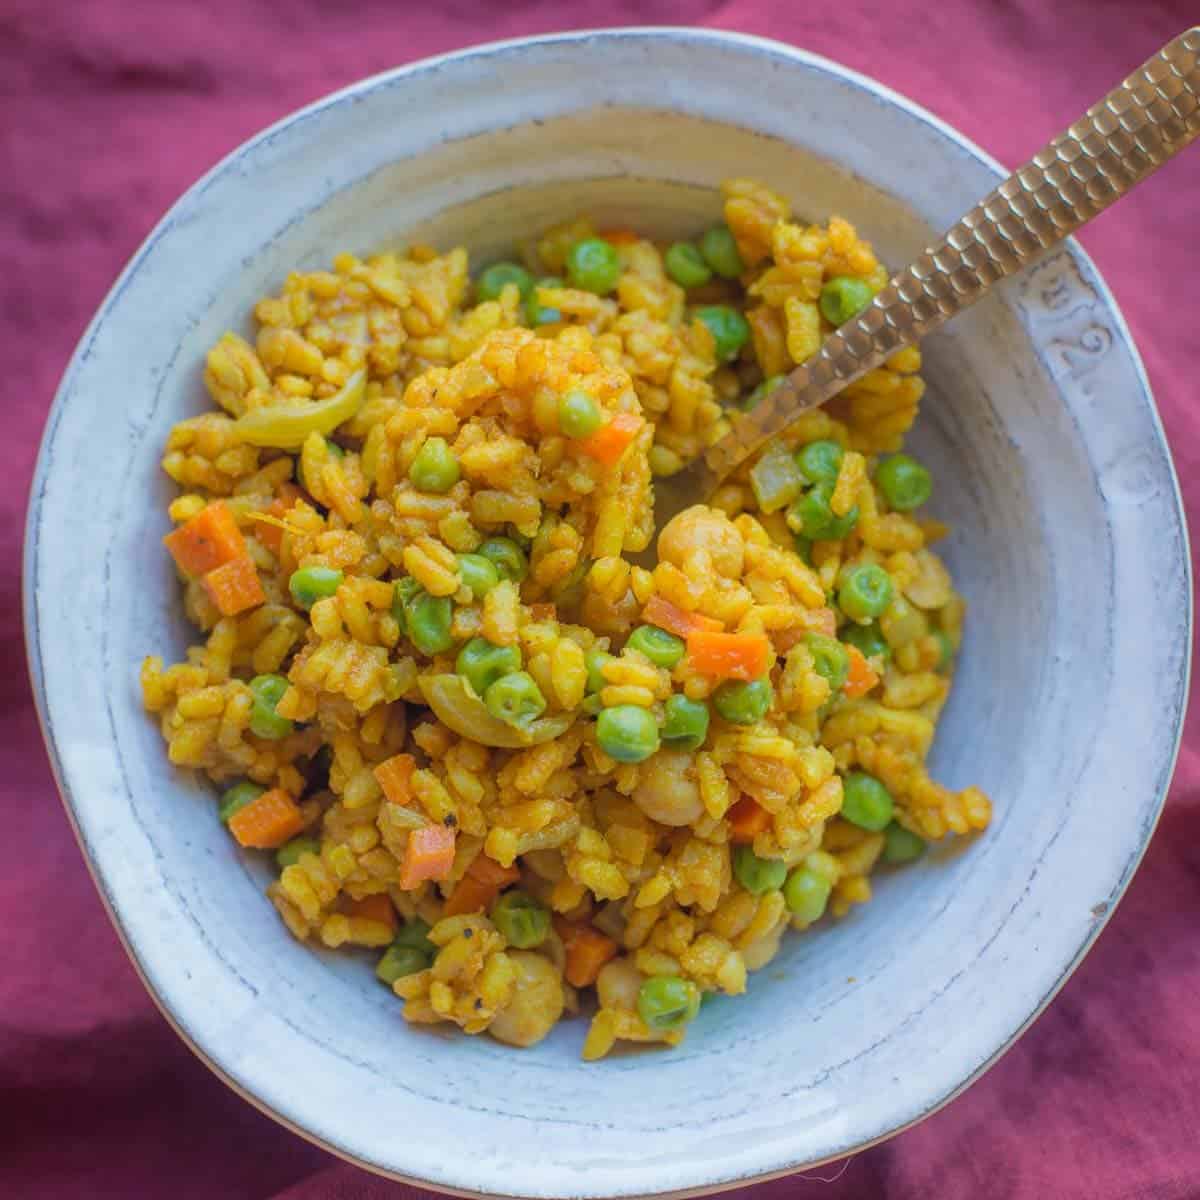 Curry Risotto made with arborio rice, yellow curry, vegetable broth, peas and carrots.